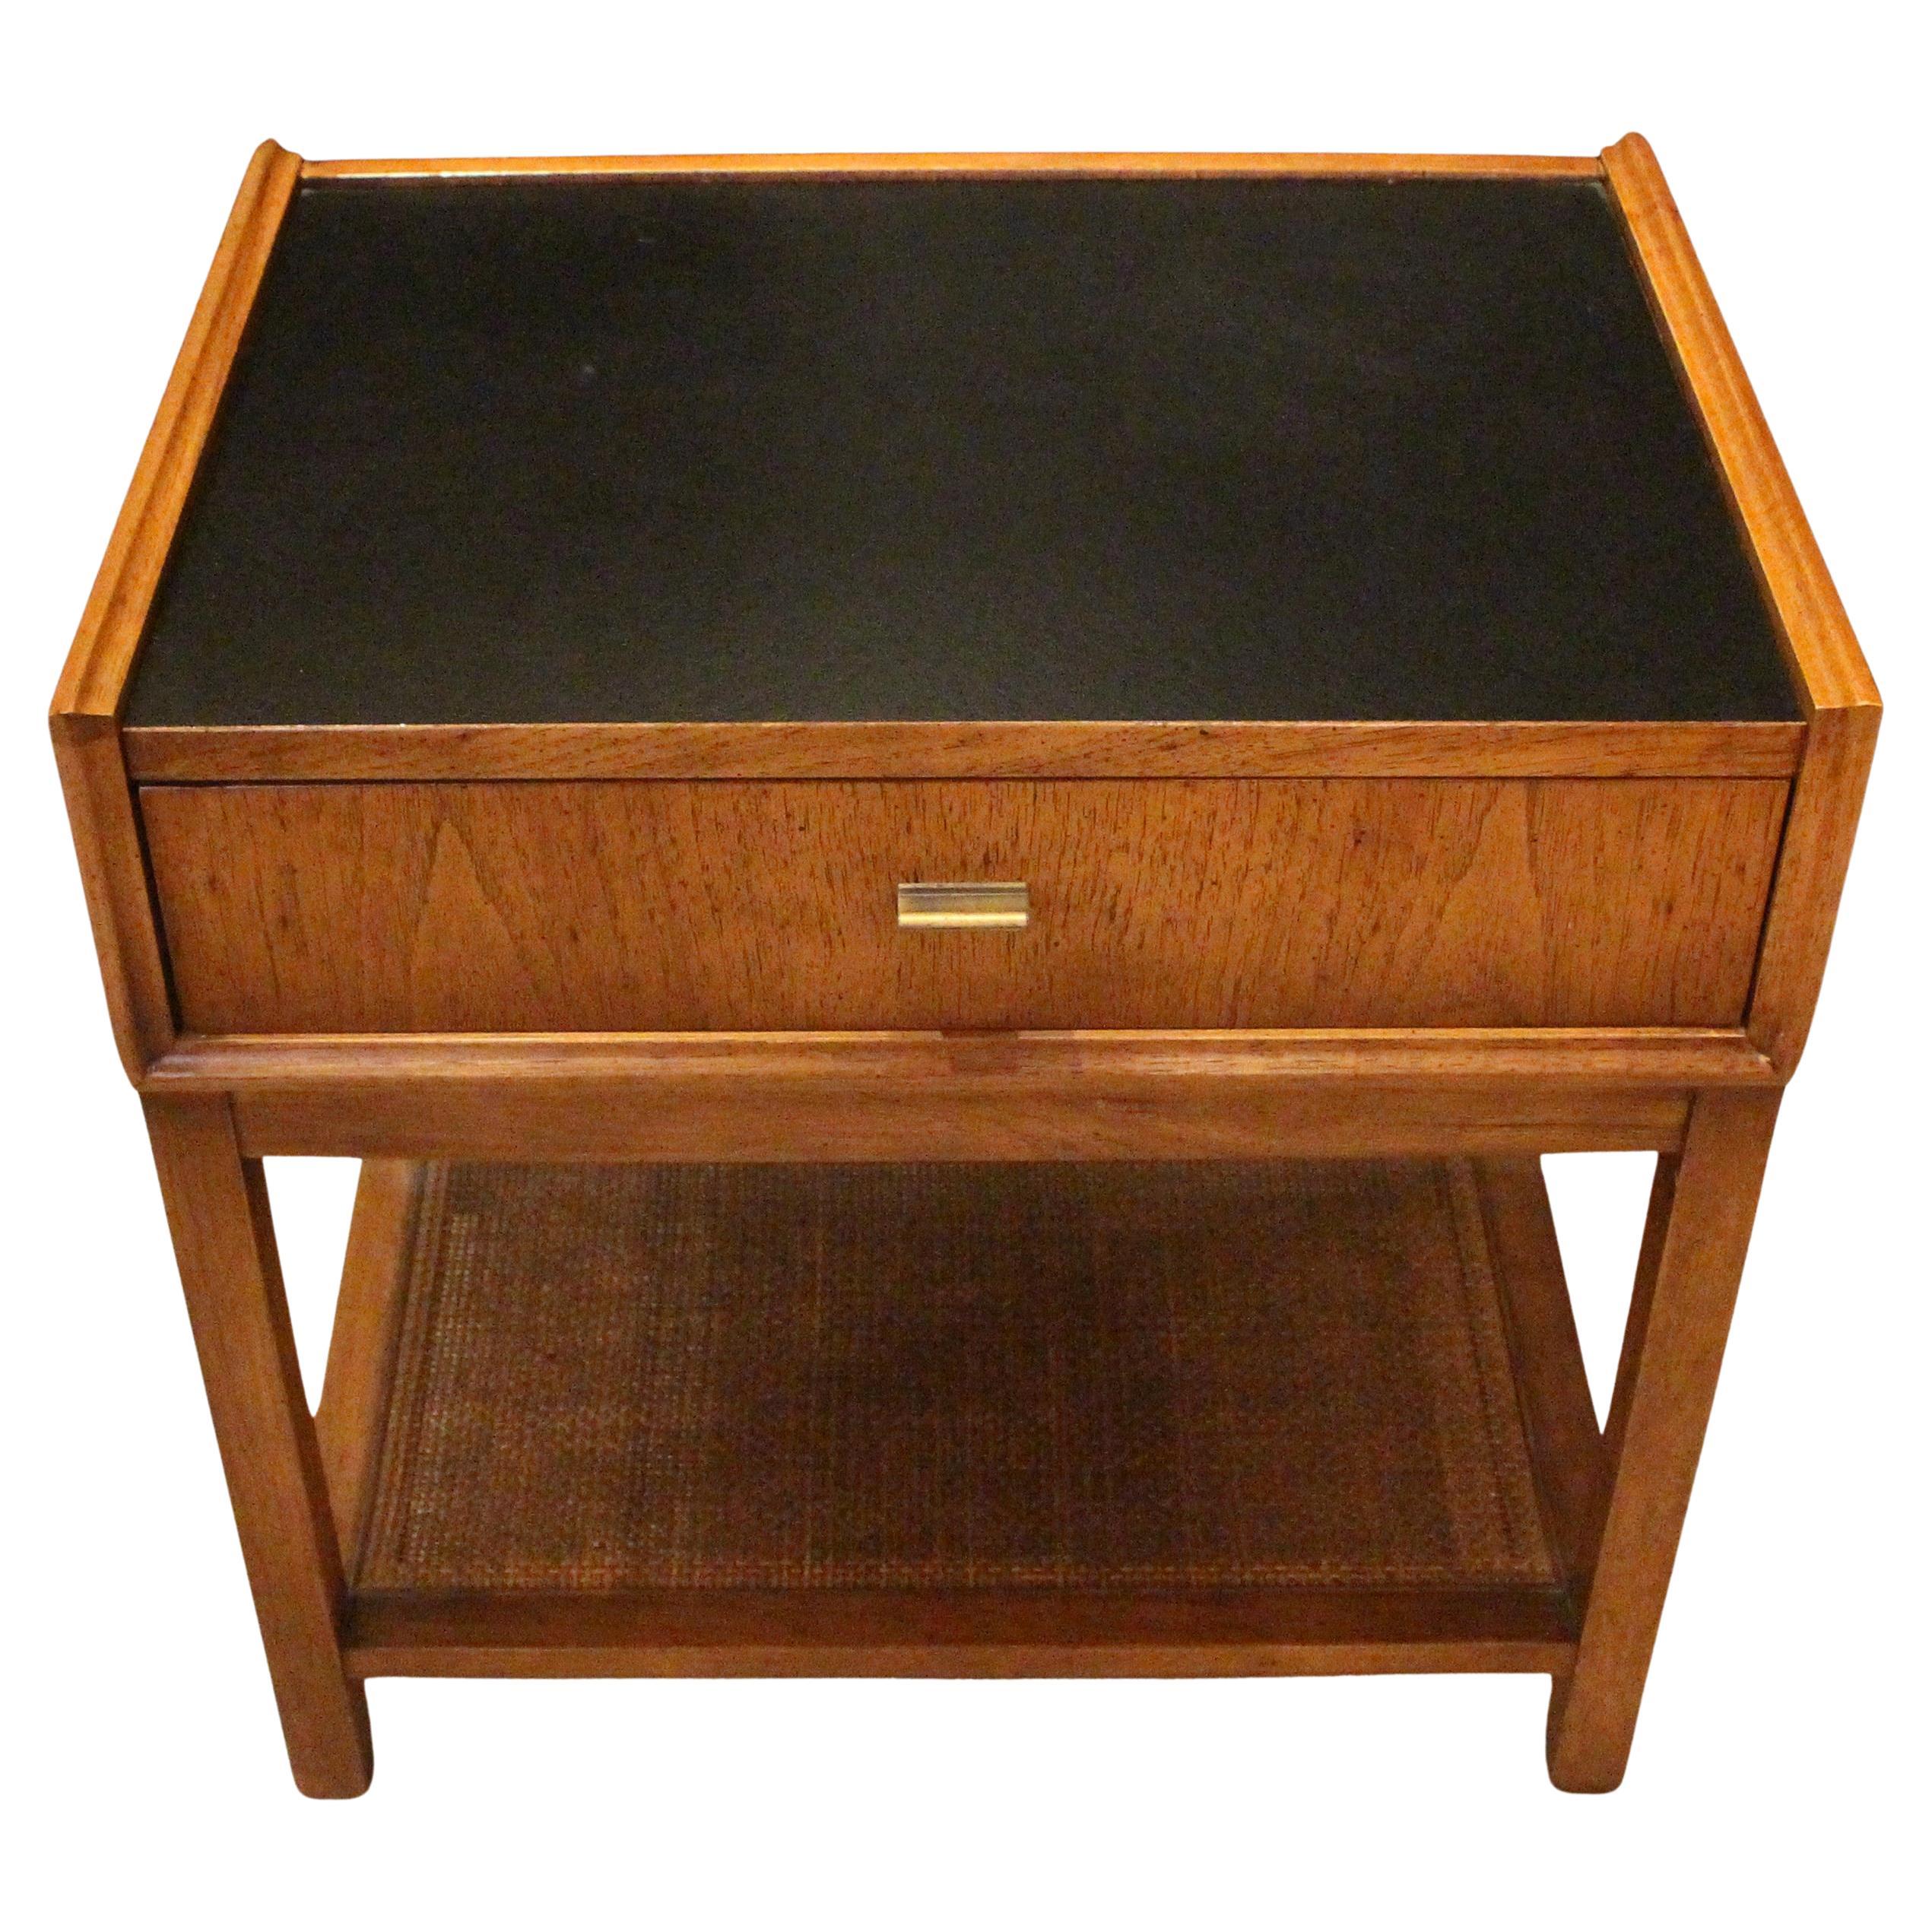 Circa 1960s Mid-Century Modern Night Stand by Founders